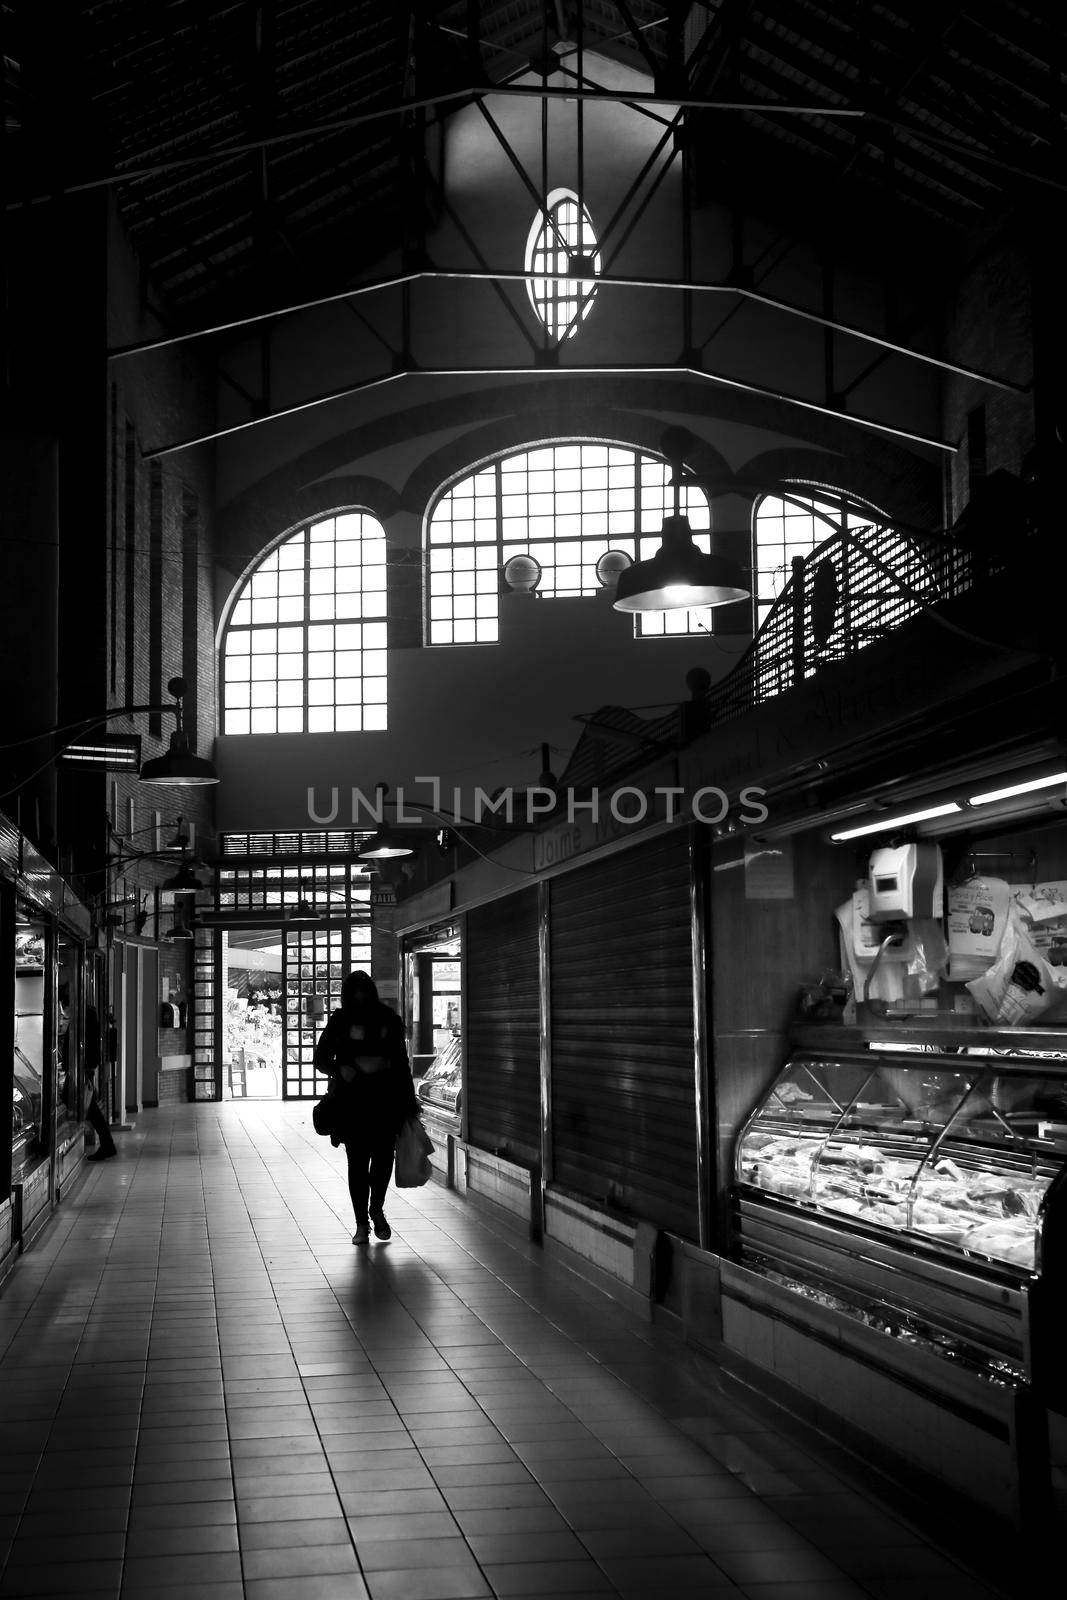 Entrance and stalls of the Alicante Food Market by soniabonet